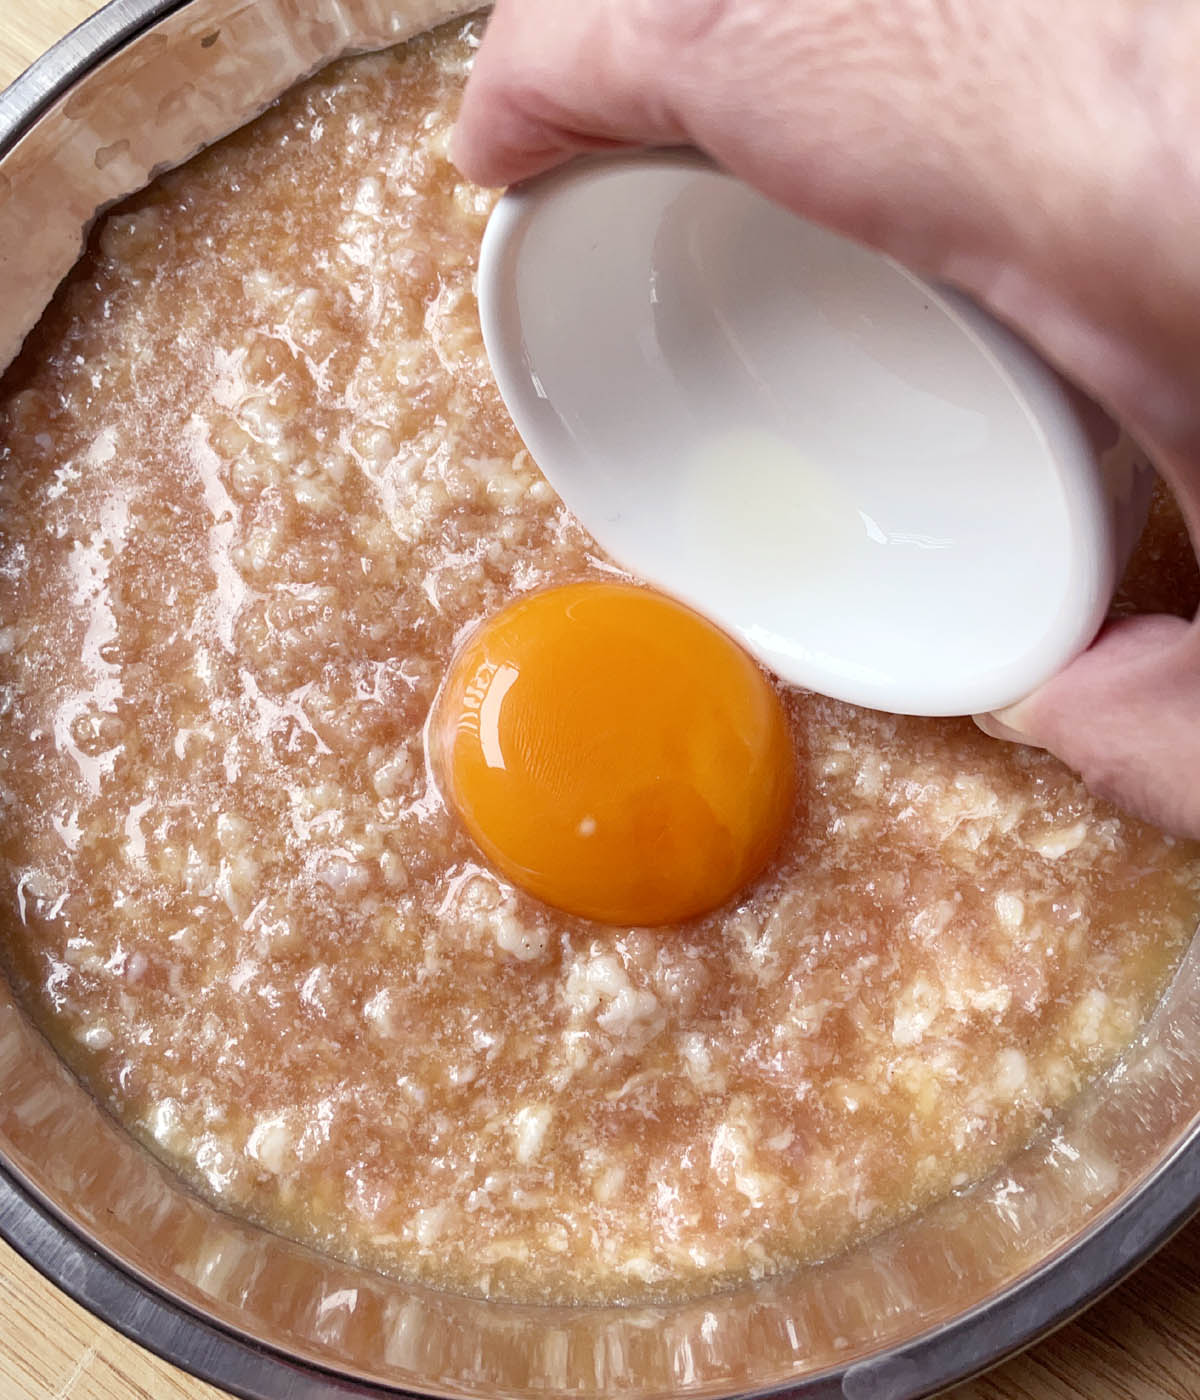 A hand pouring an egg yolk from a white dish onto a raw pink ground mix mixture in a metal dish.